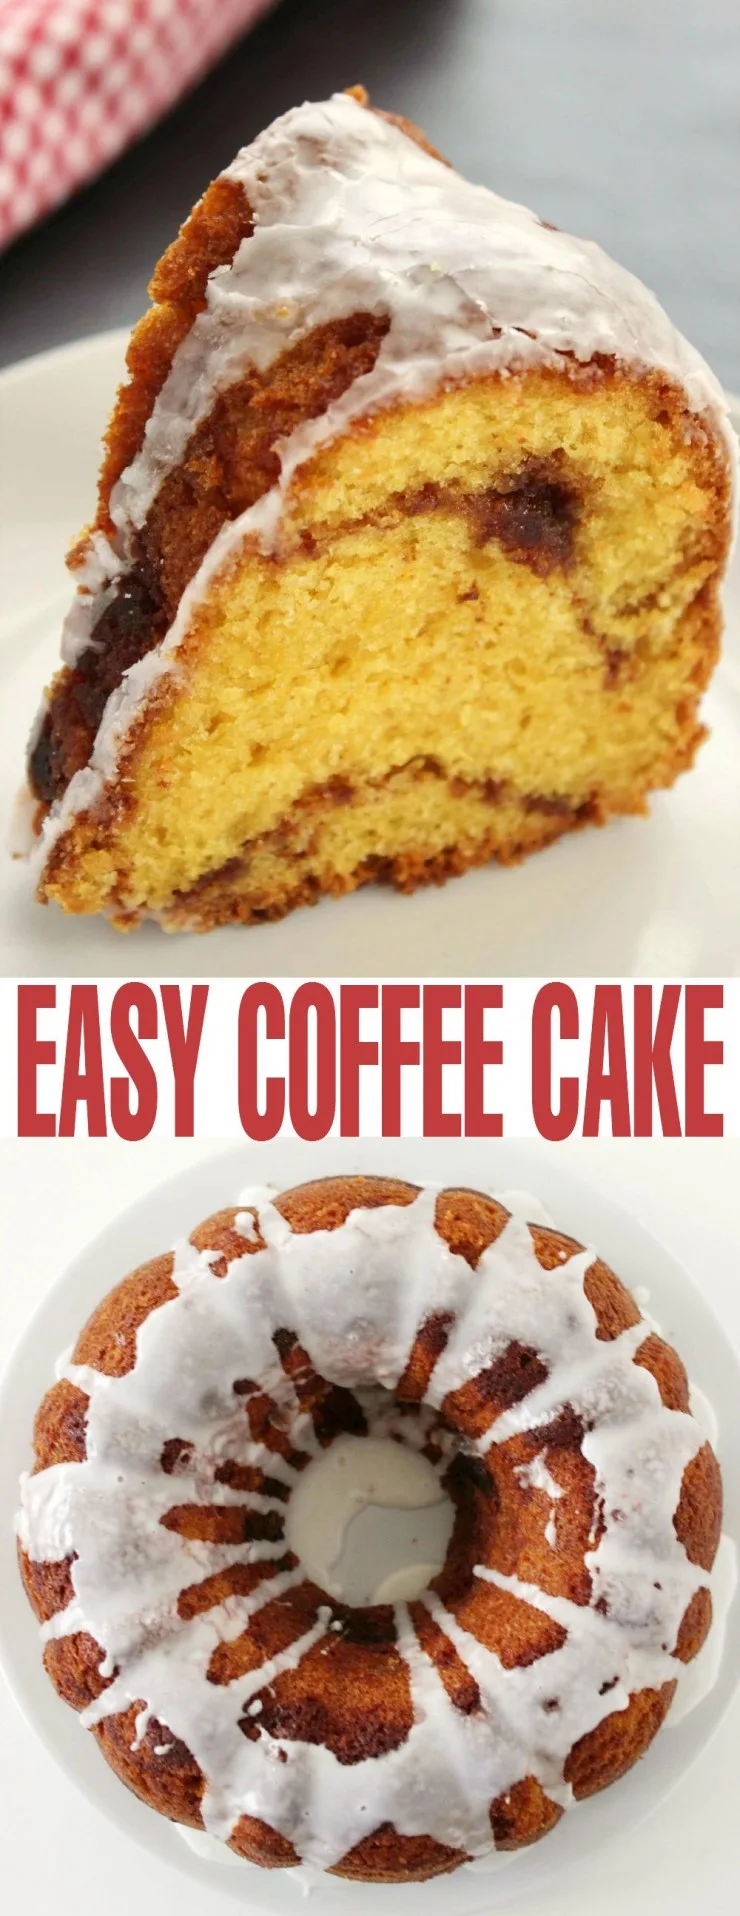 You won't believe just how easy this coffee cake recipe is to whip up. This is a coffee cake recipe literally anyone can follow.